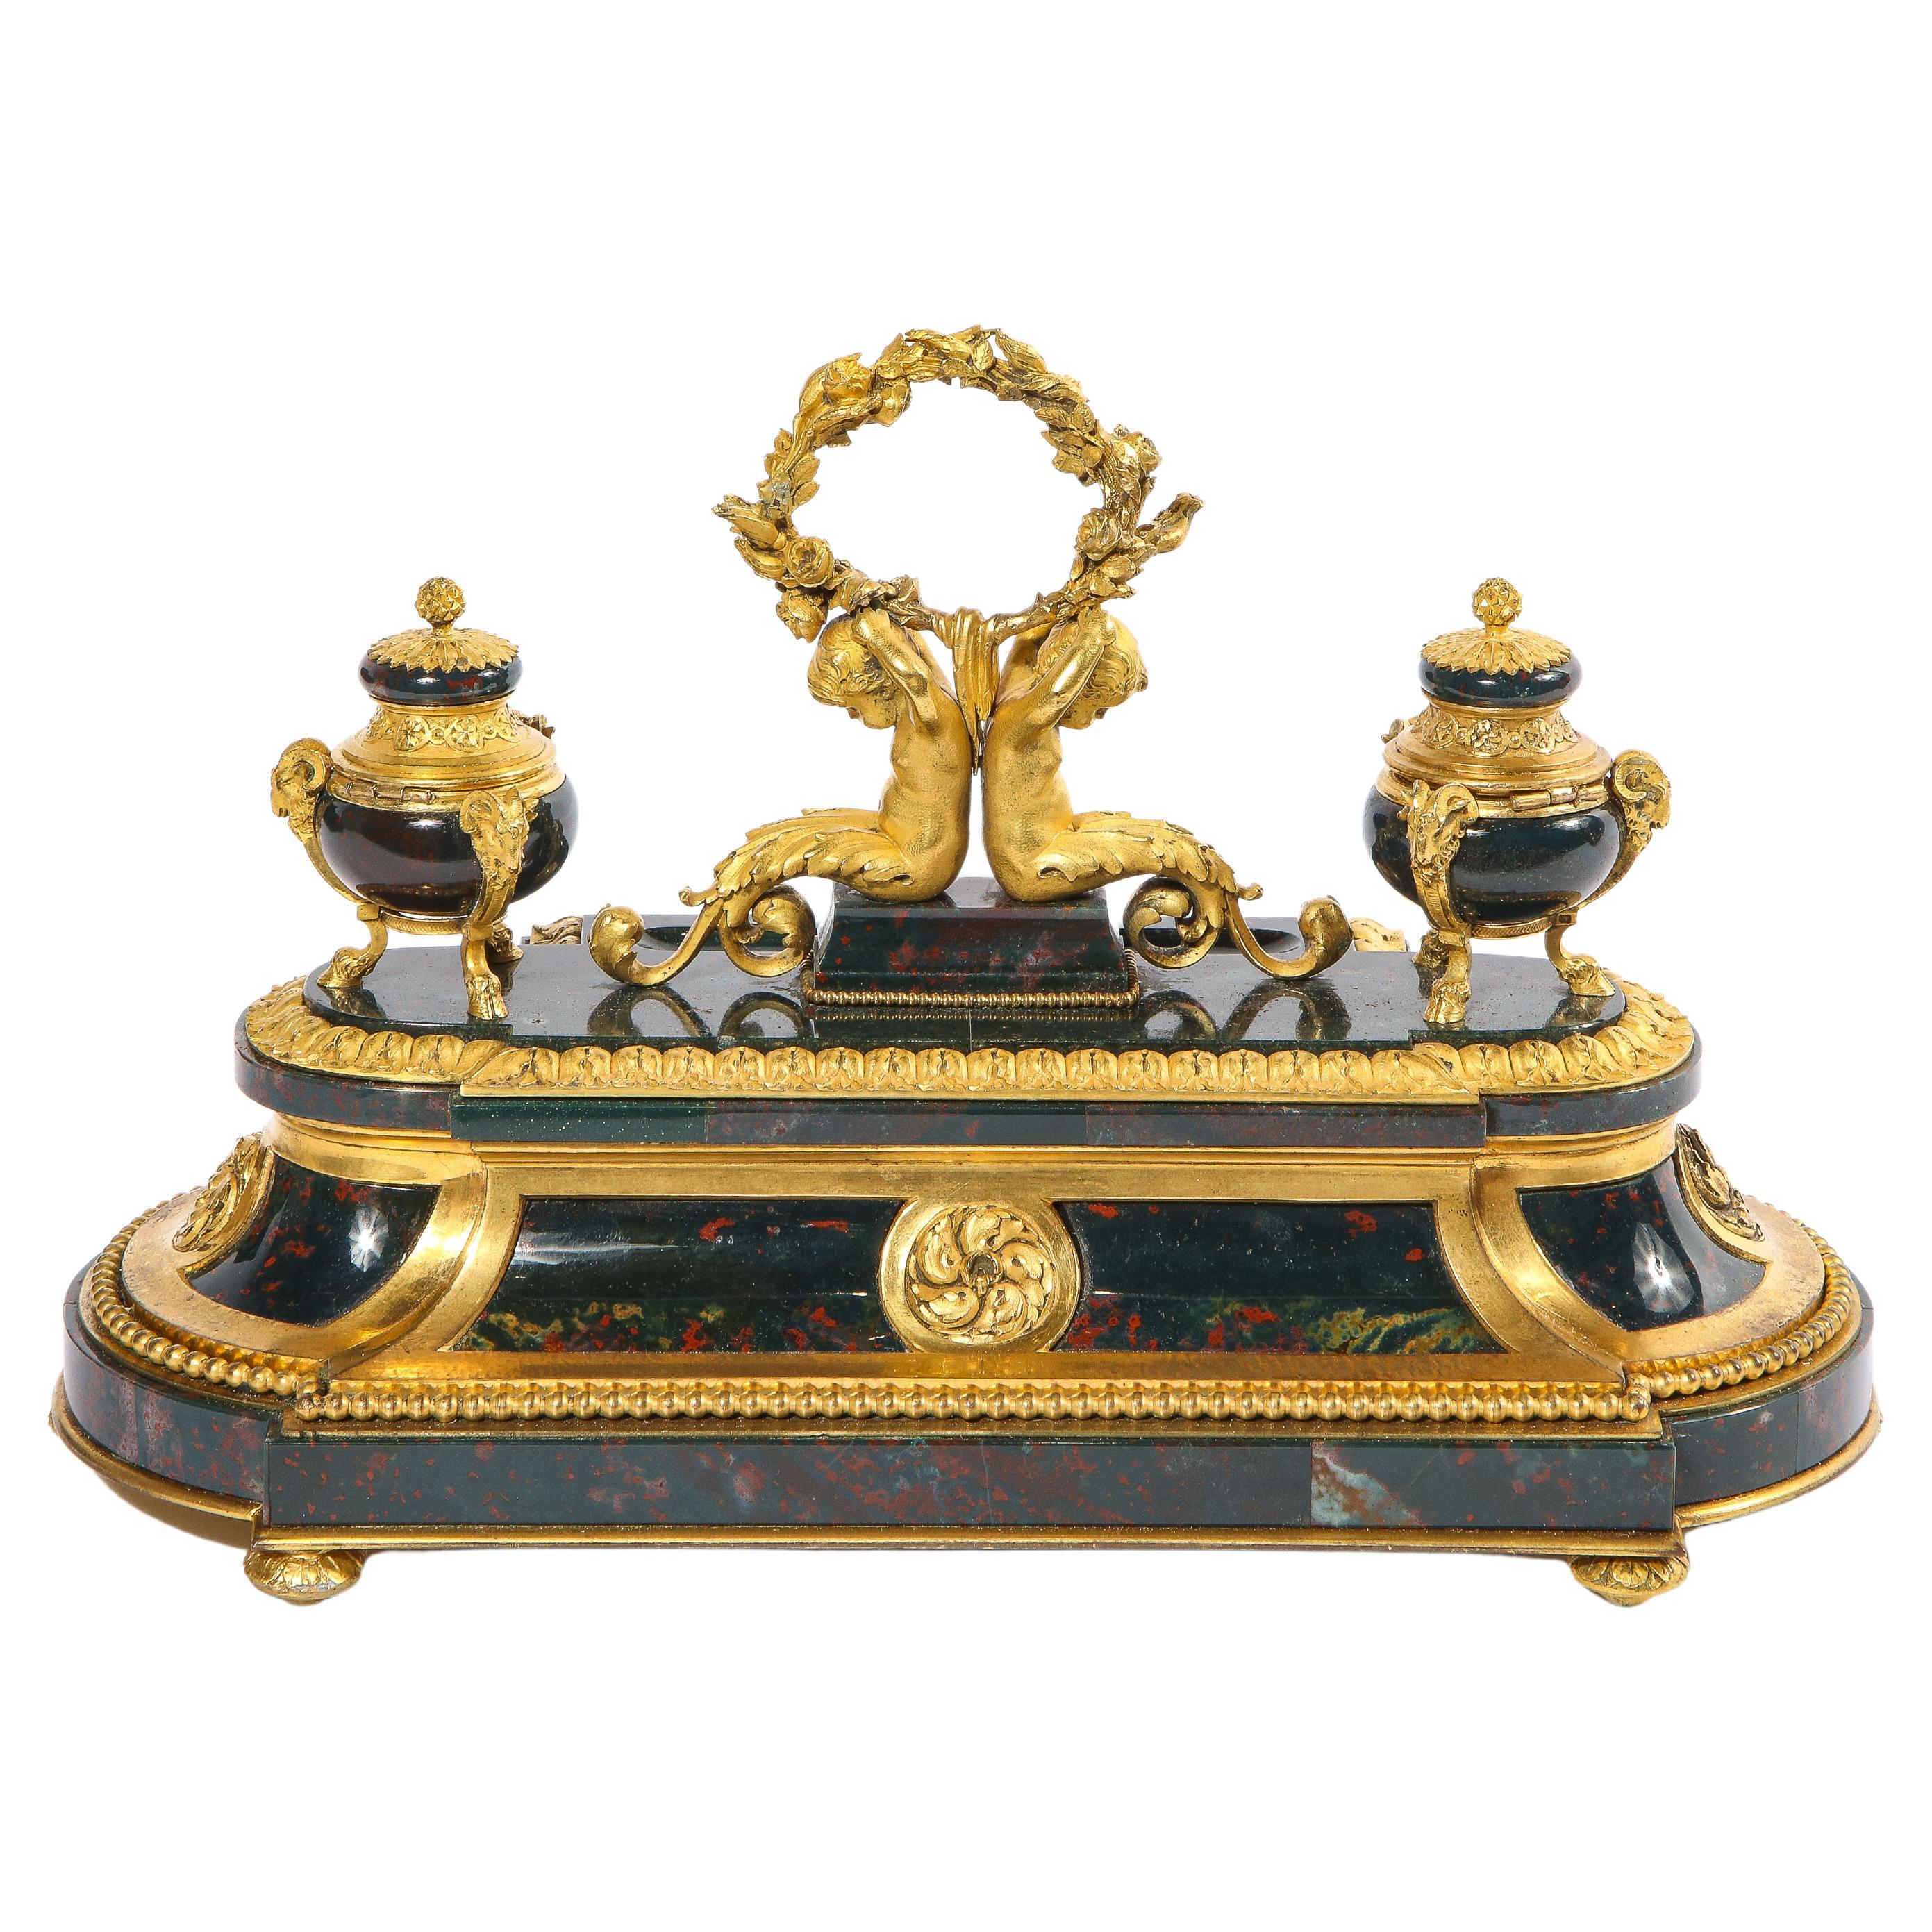 An Exquisite and Rare French Louis XVI Style Ormolu-Mounted Bloodstone Inkwell